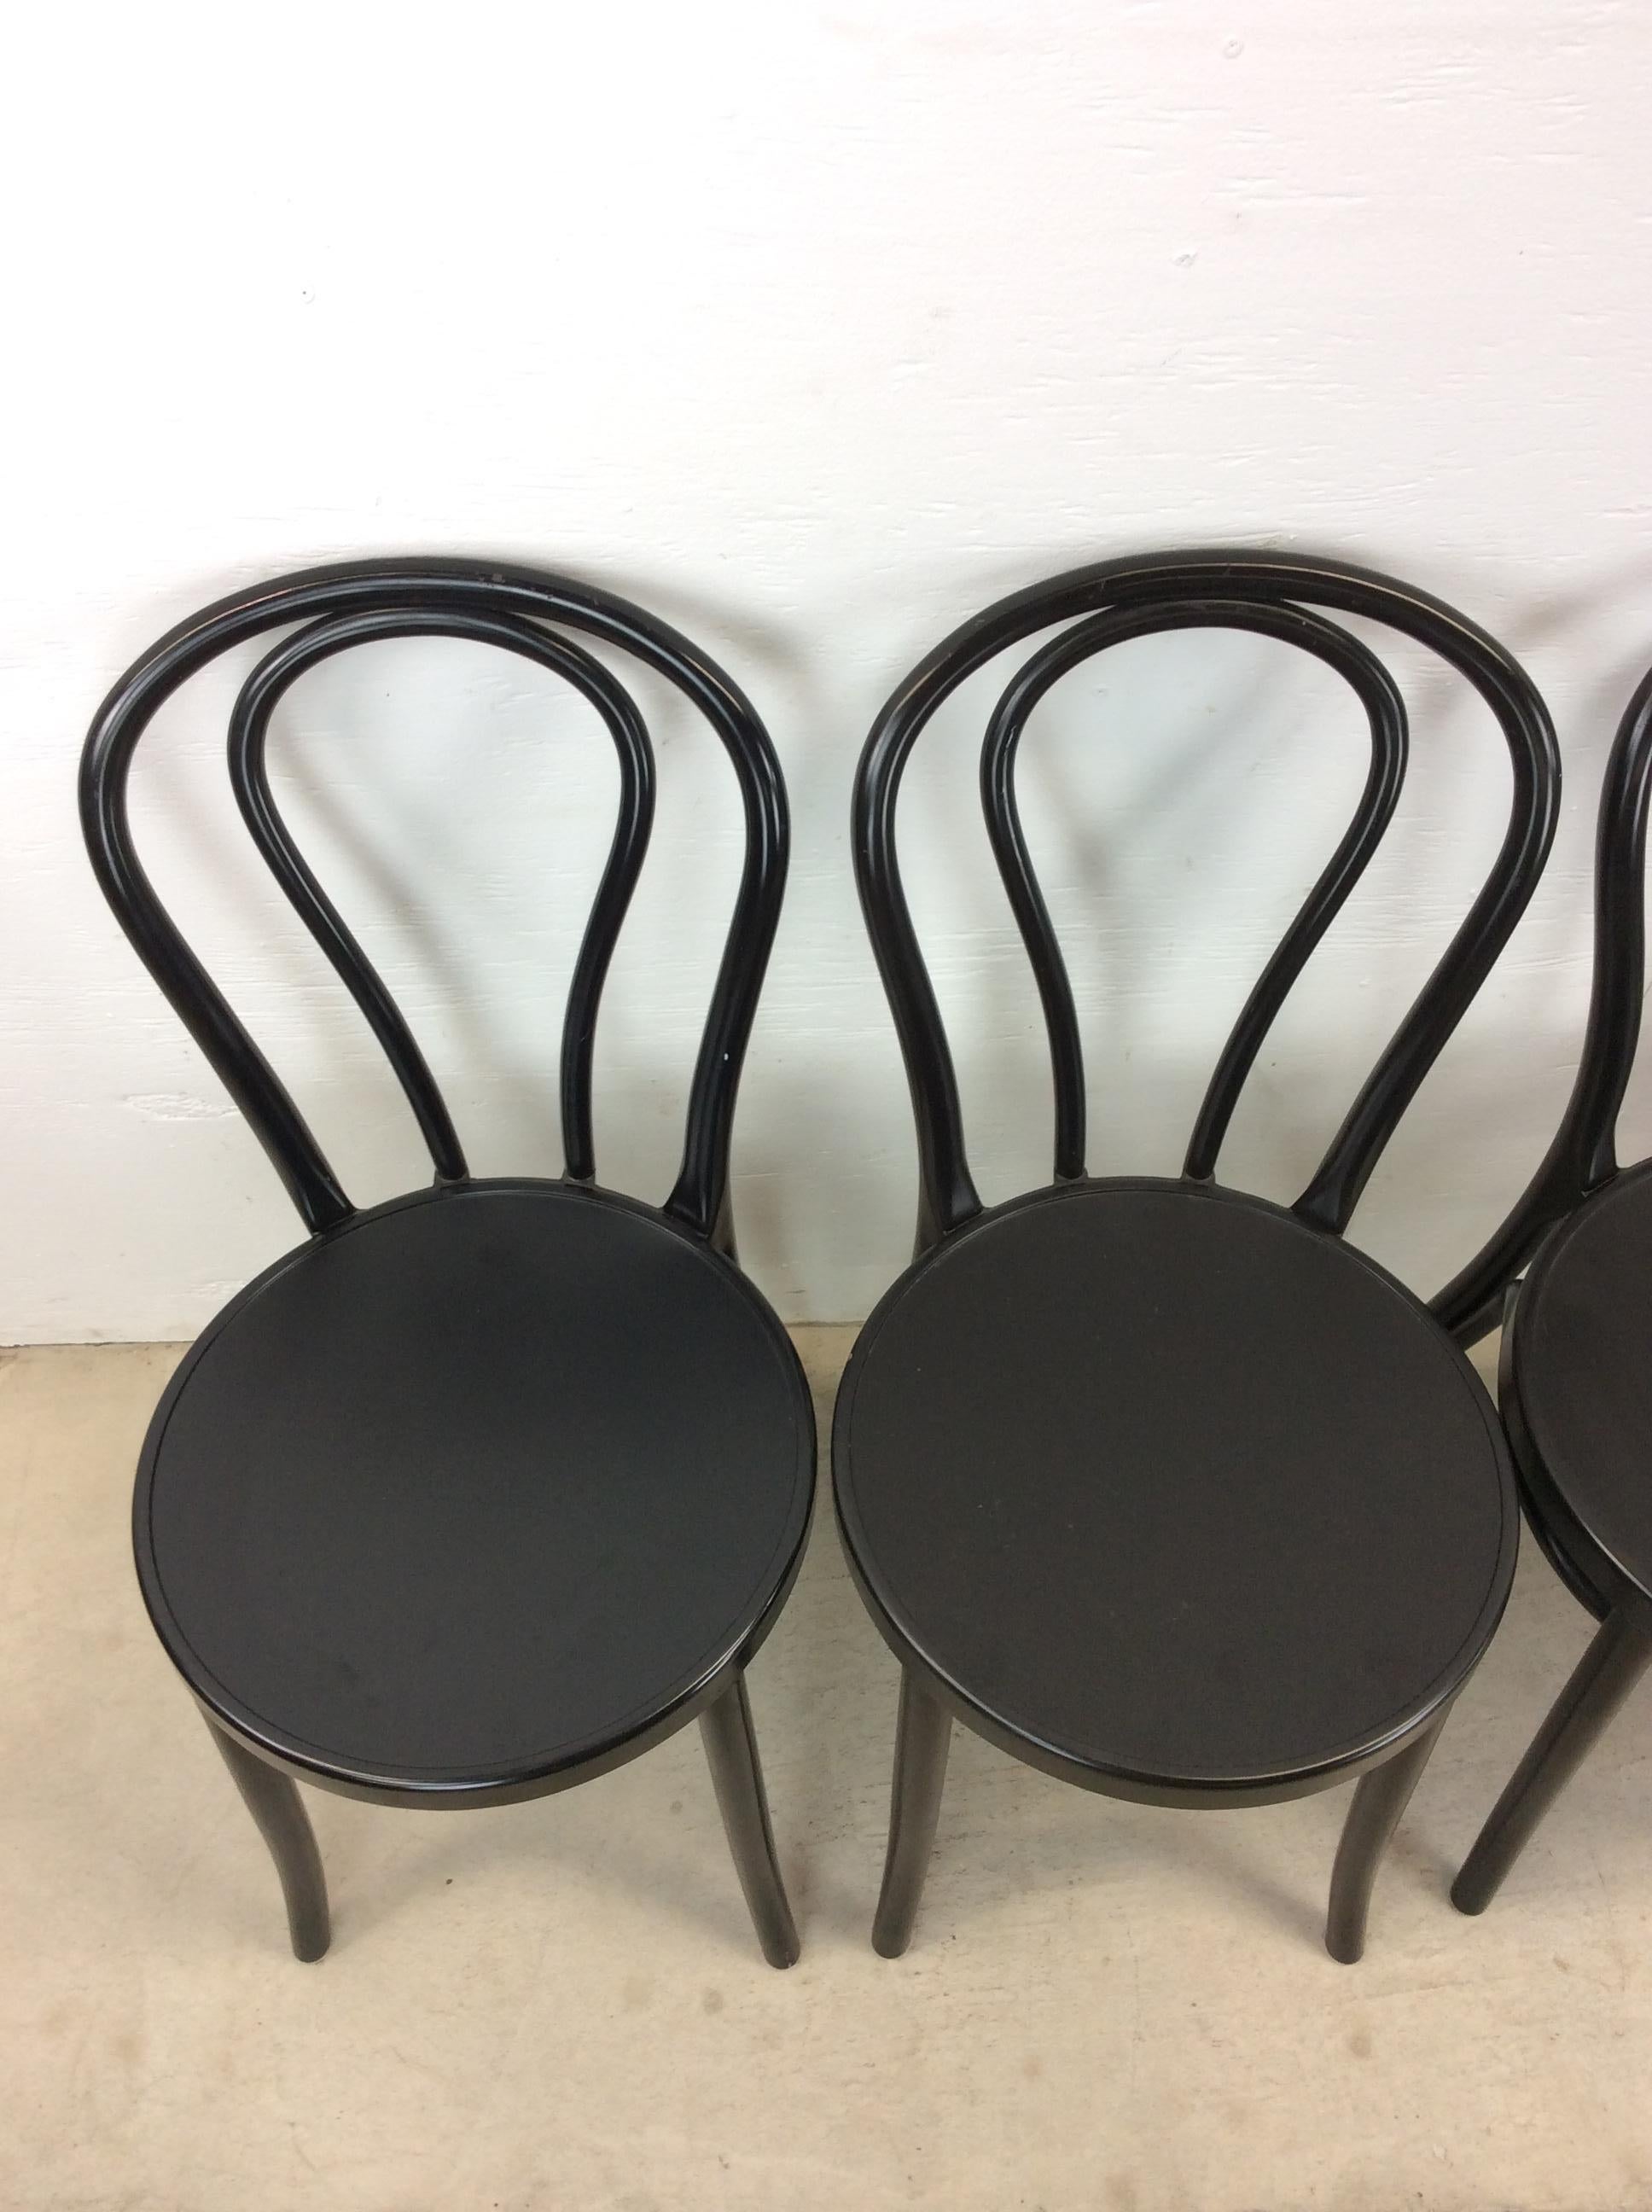 Unknown Set of 4 Vintage IKEA Black Cafe Style Chairs For Sale